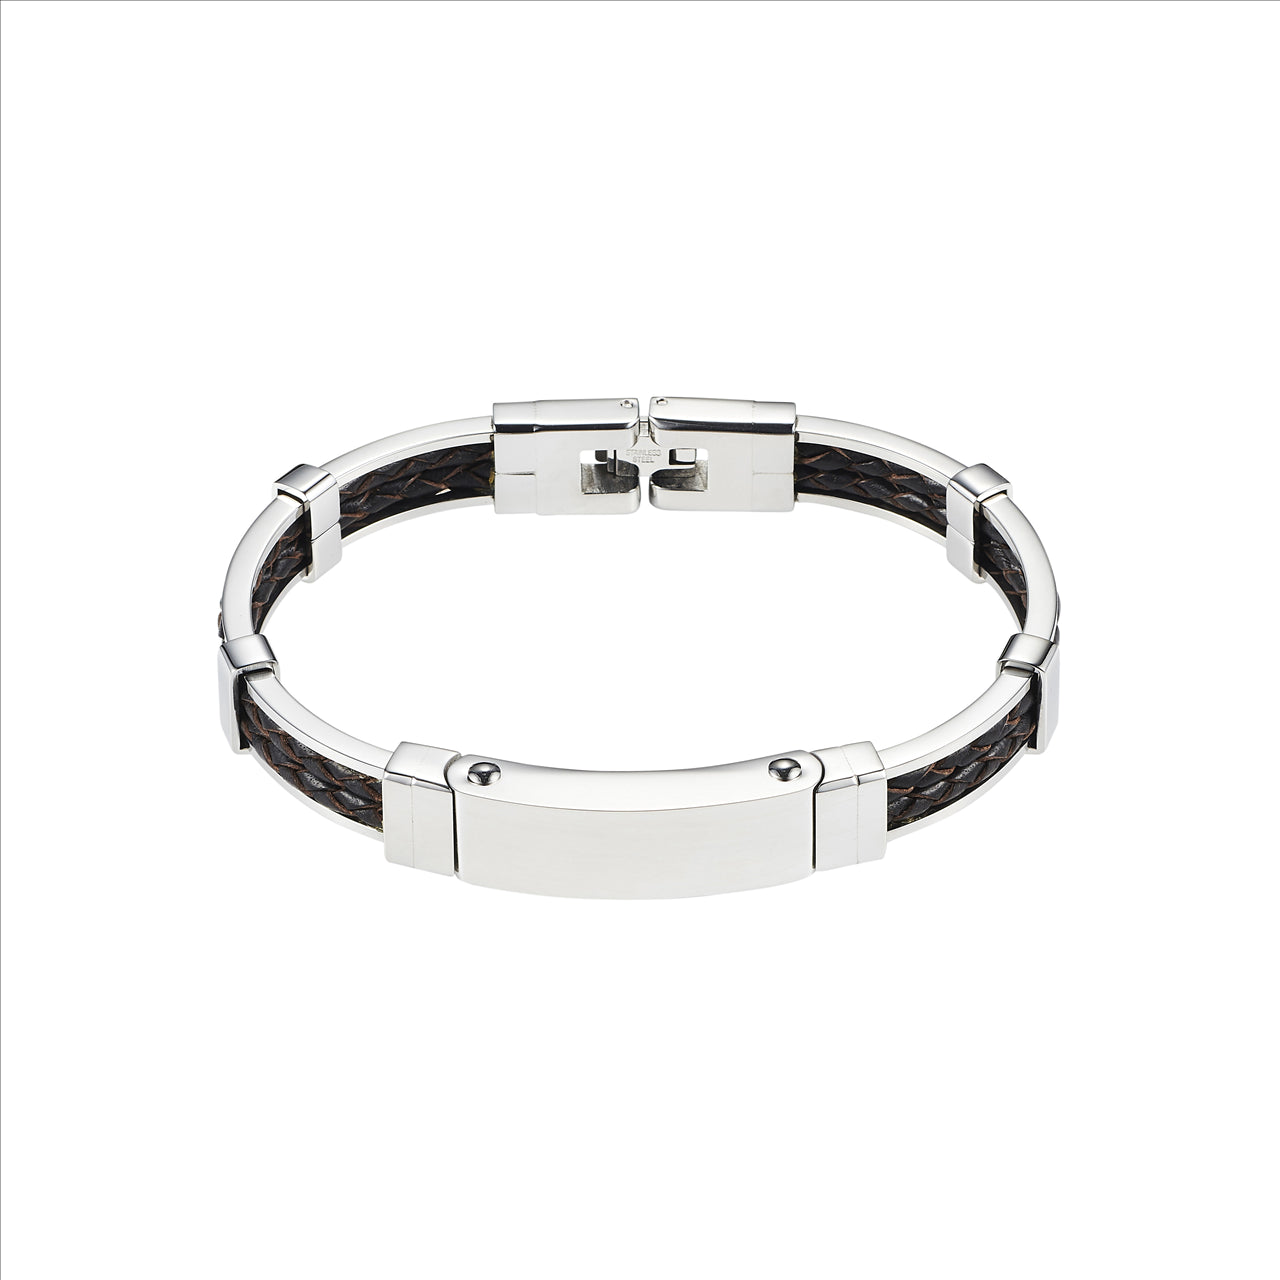 Polished Stainless Steel Bracelet with Double Strand Braided Brown Leather